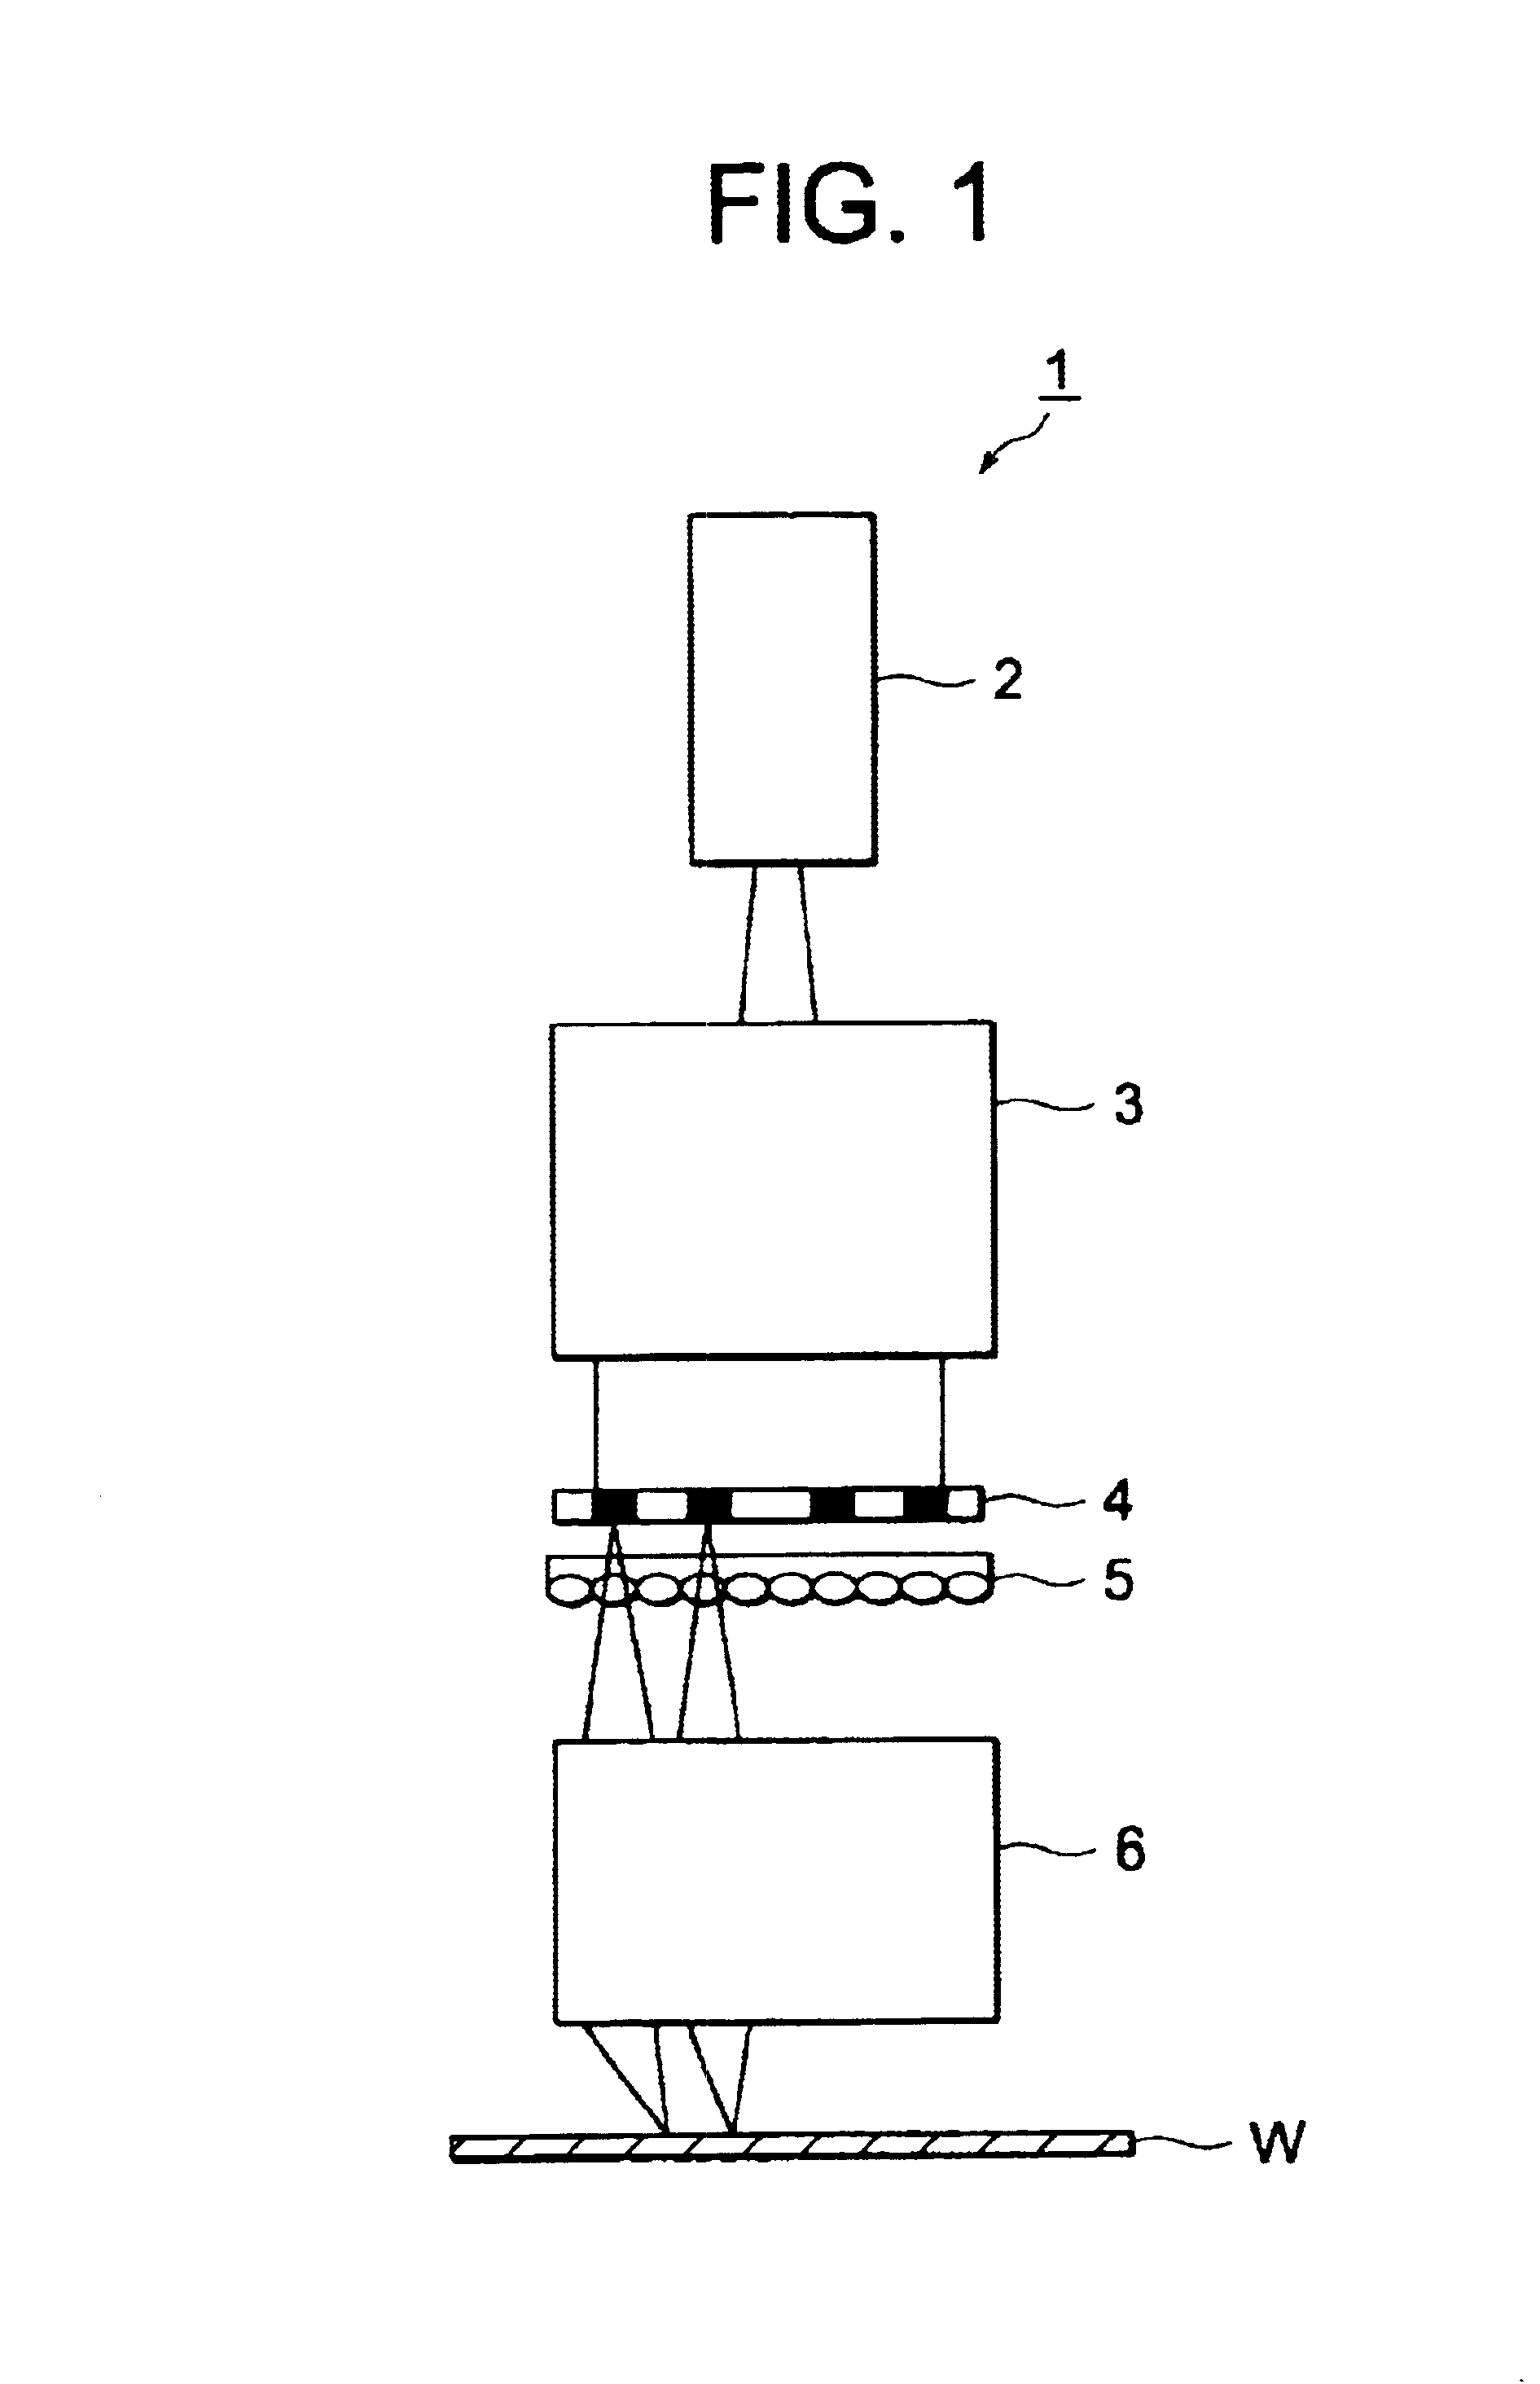 Shape of microdot mark formed by laser beam and microdot marking method